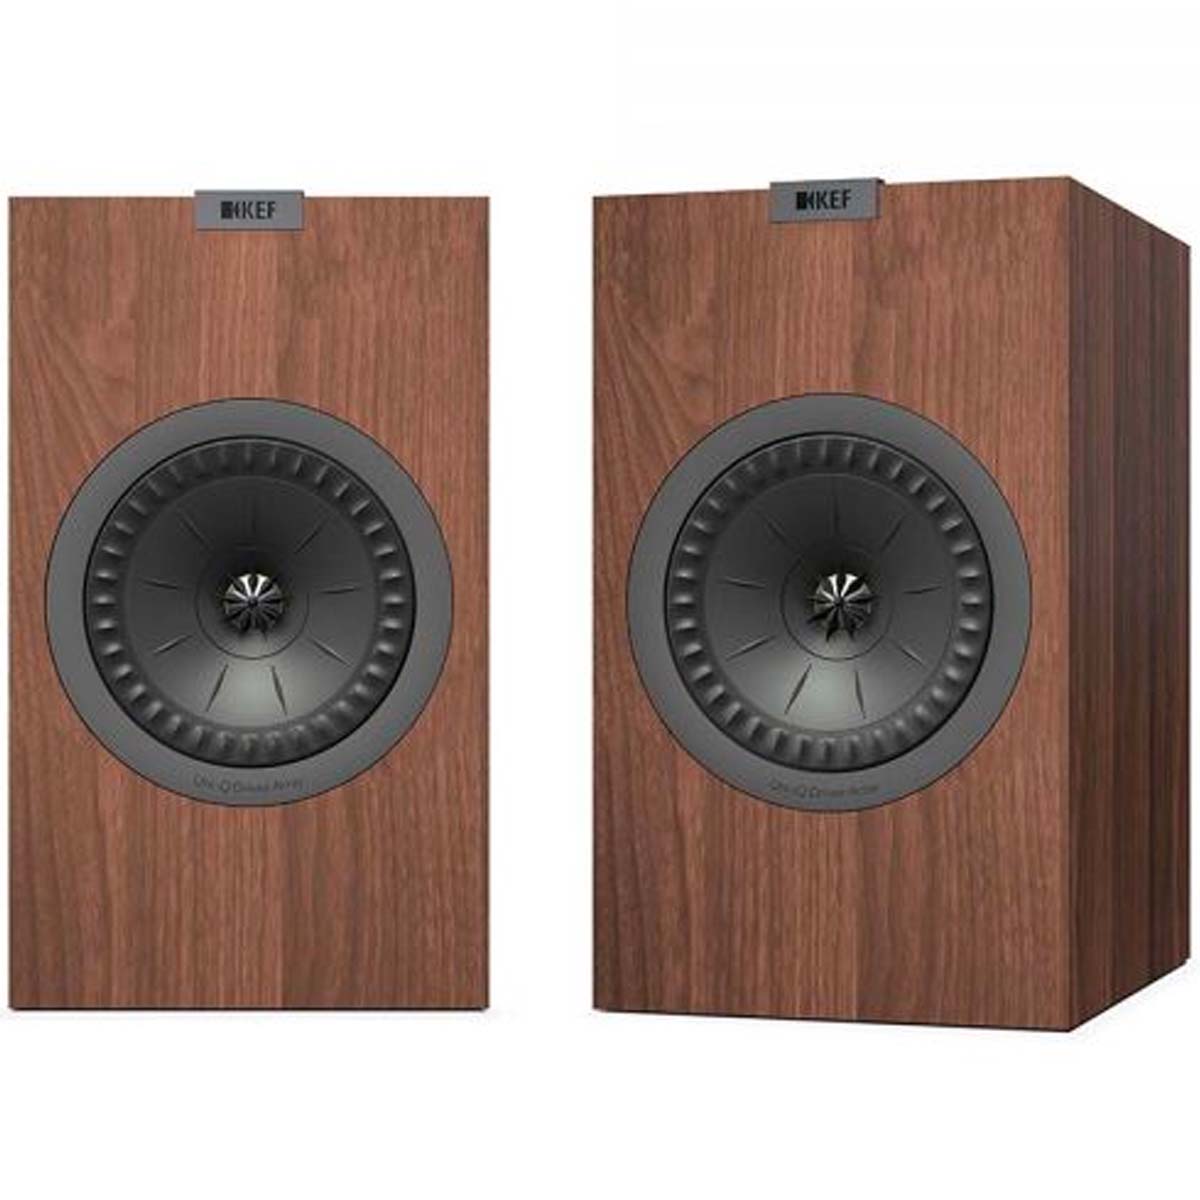 A great home theater speaker set-up requires a big, bold sound! q150 walnut 1 1